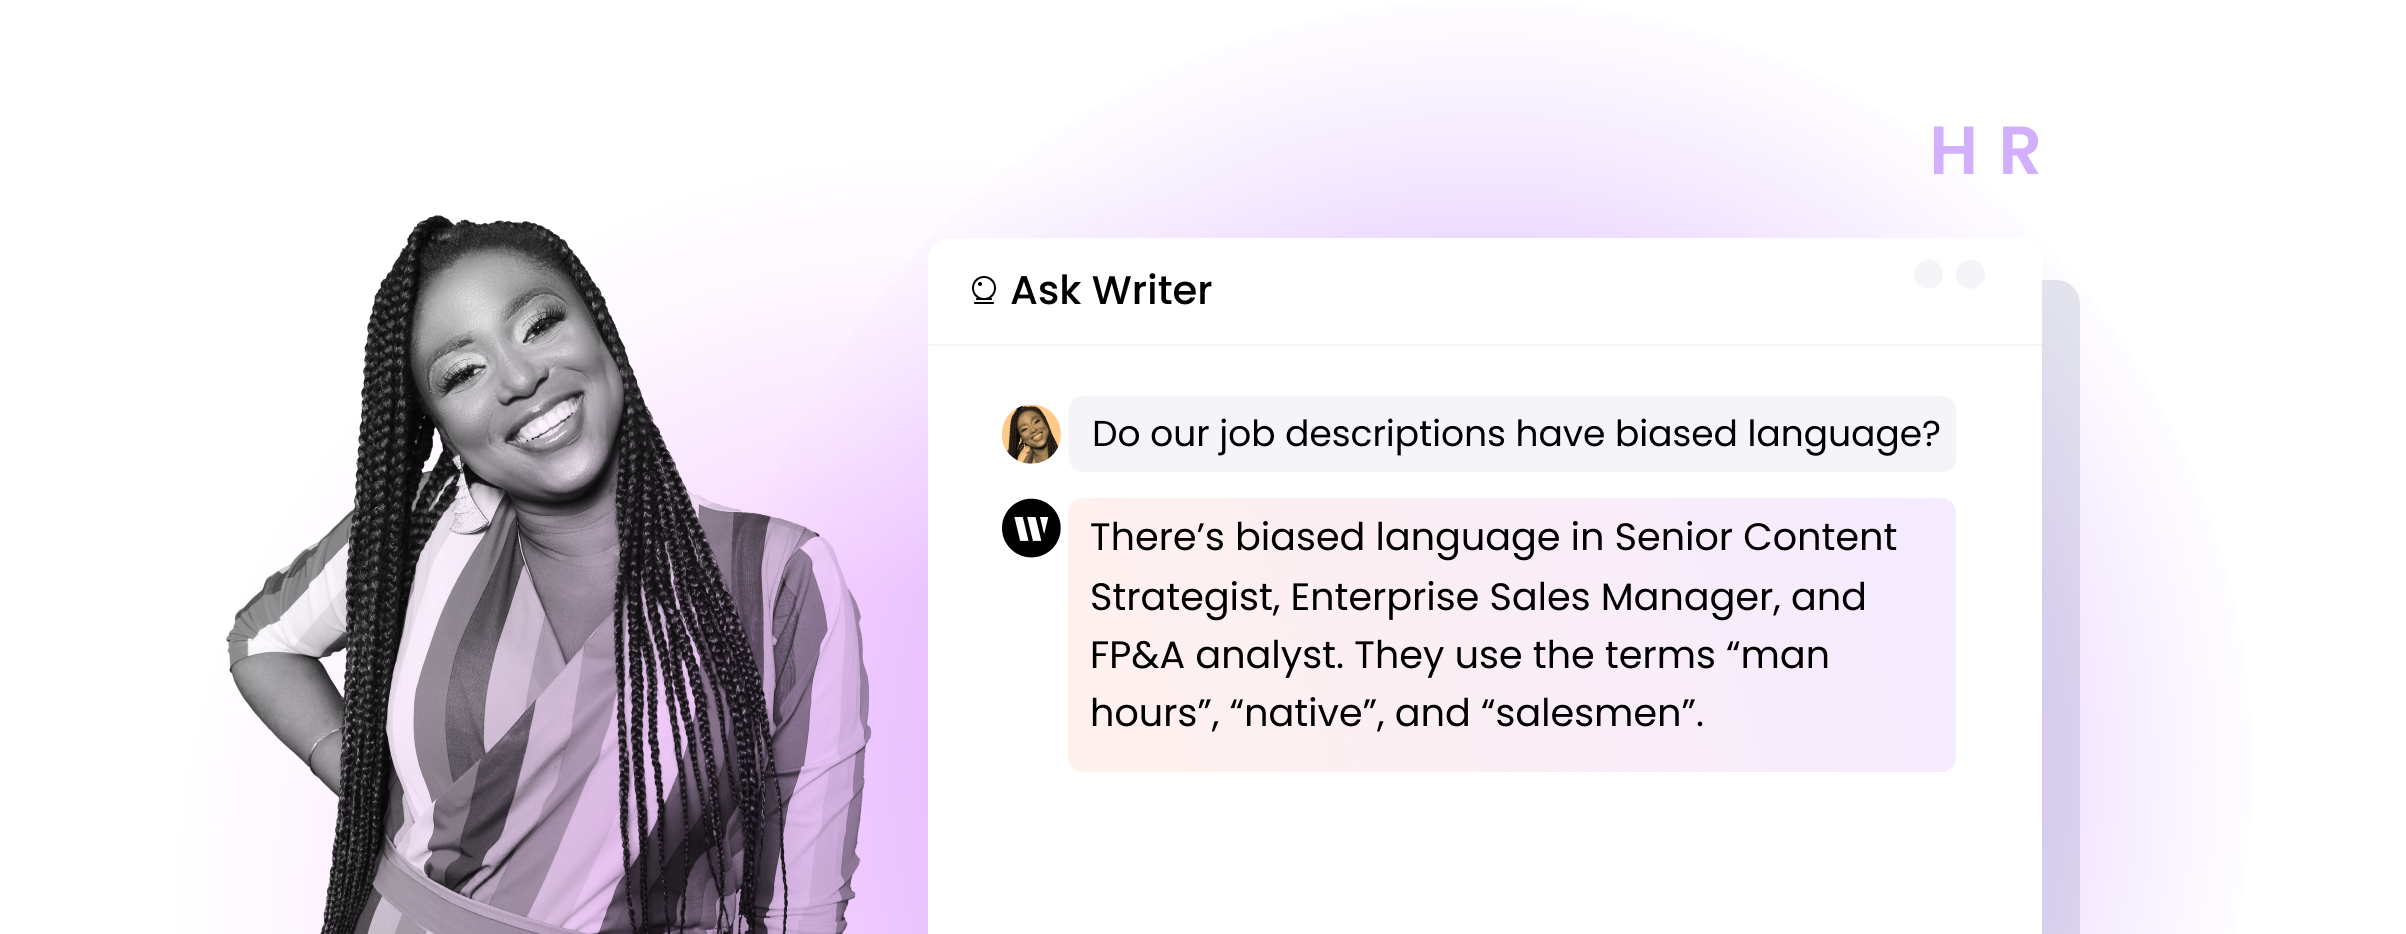 HR person using Ask Writer. Question: Do our job descriptions have biased language? Response: There’s biased language in Senior Content Strategist, Enterprise Sales Manager, and FP&A analyst. They use the terms “man hours”, “native”, and “salesmen”.